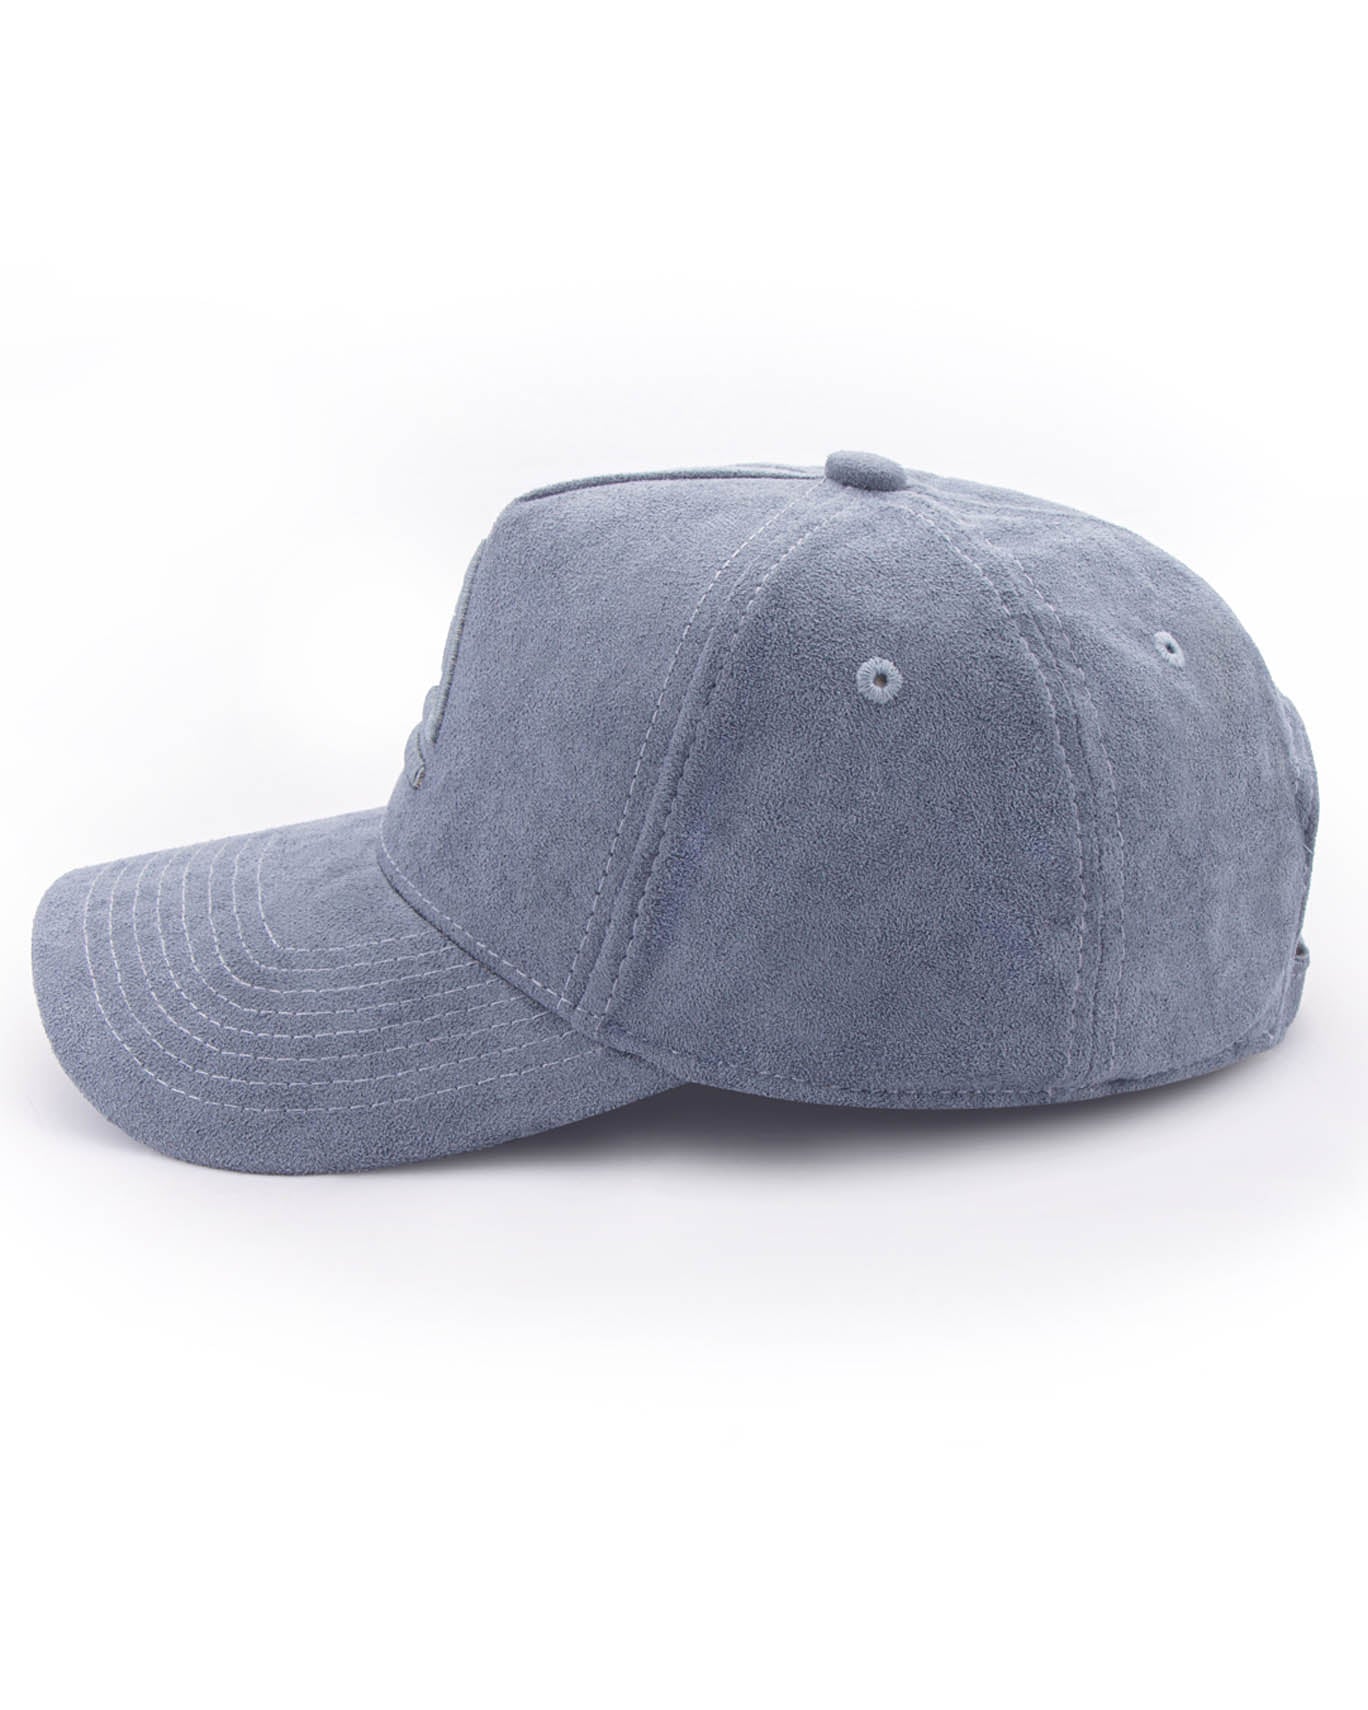 Stone Grey Suede - A Frame Strapback--ABW STORE